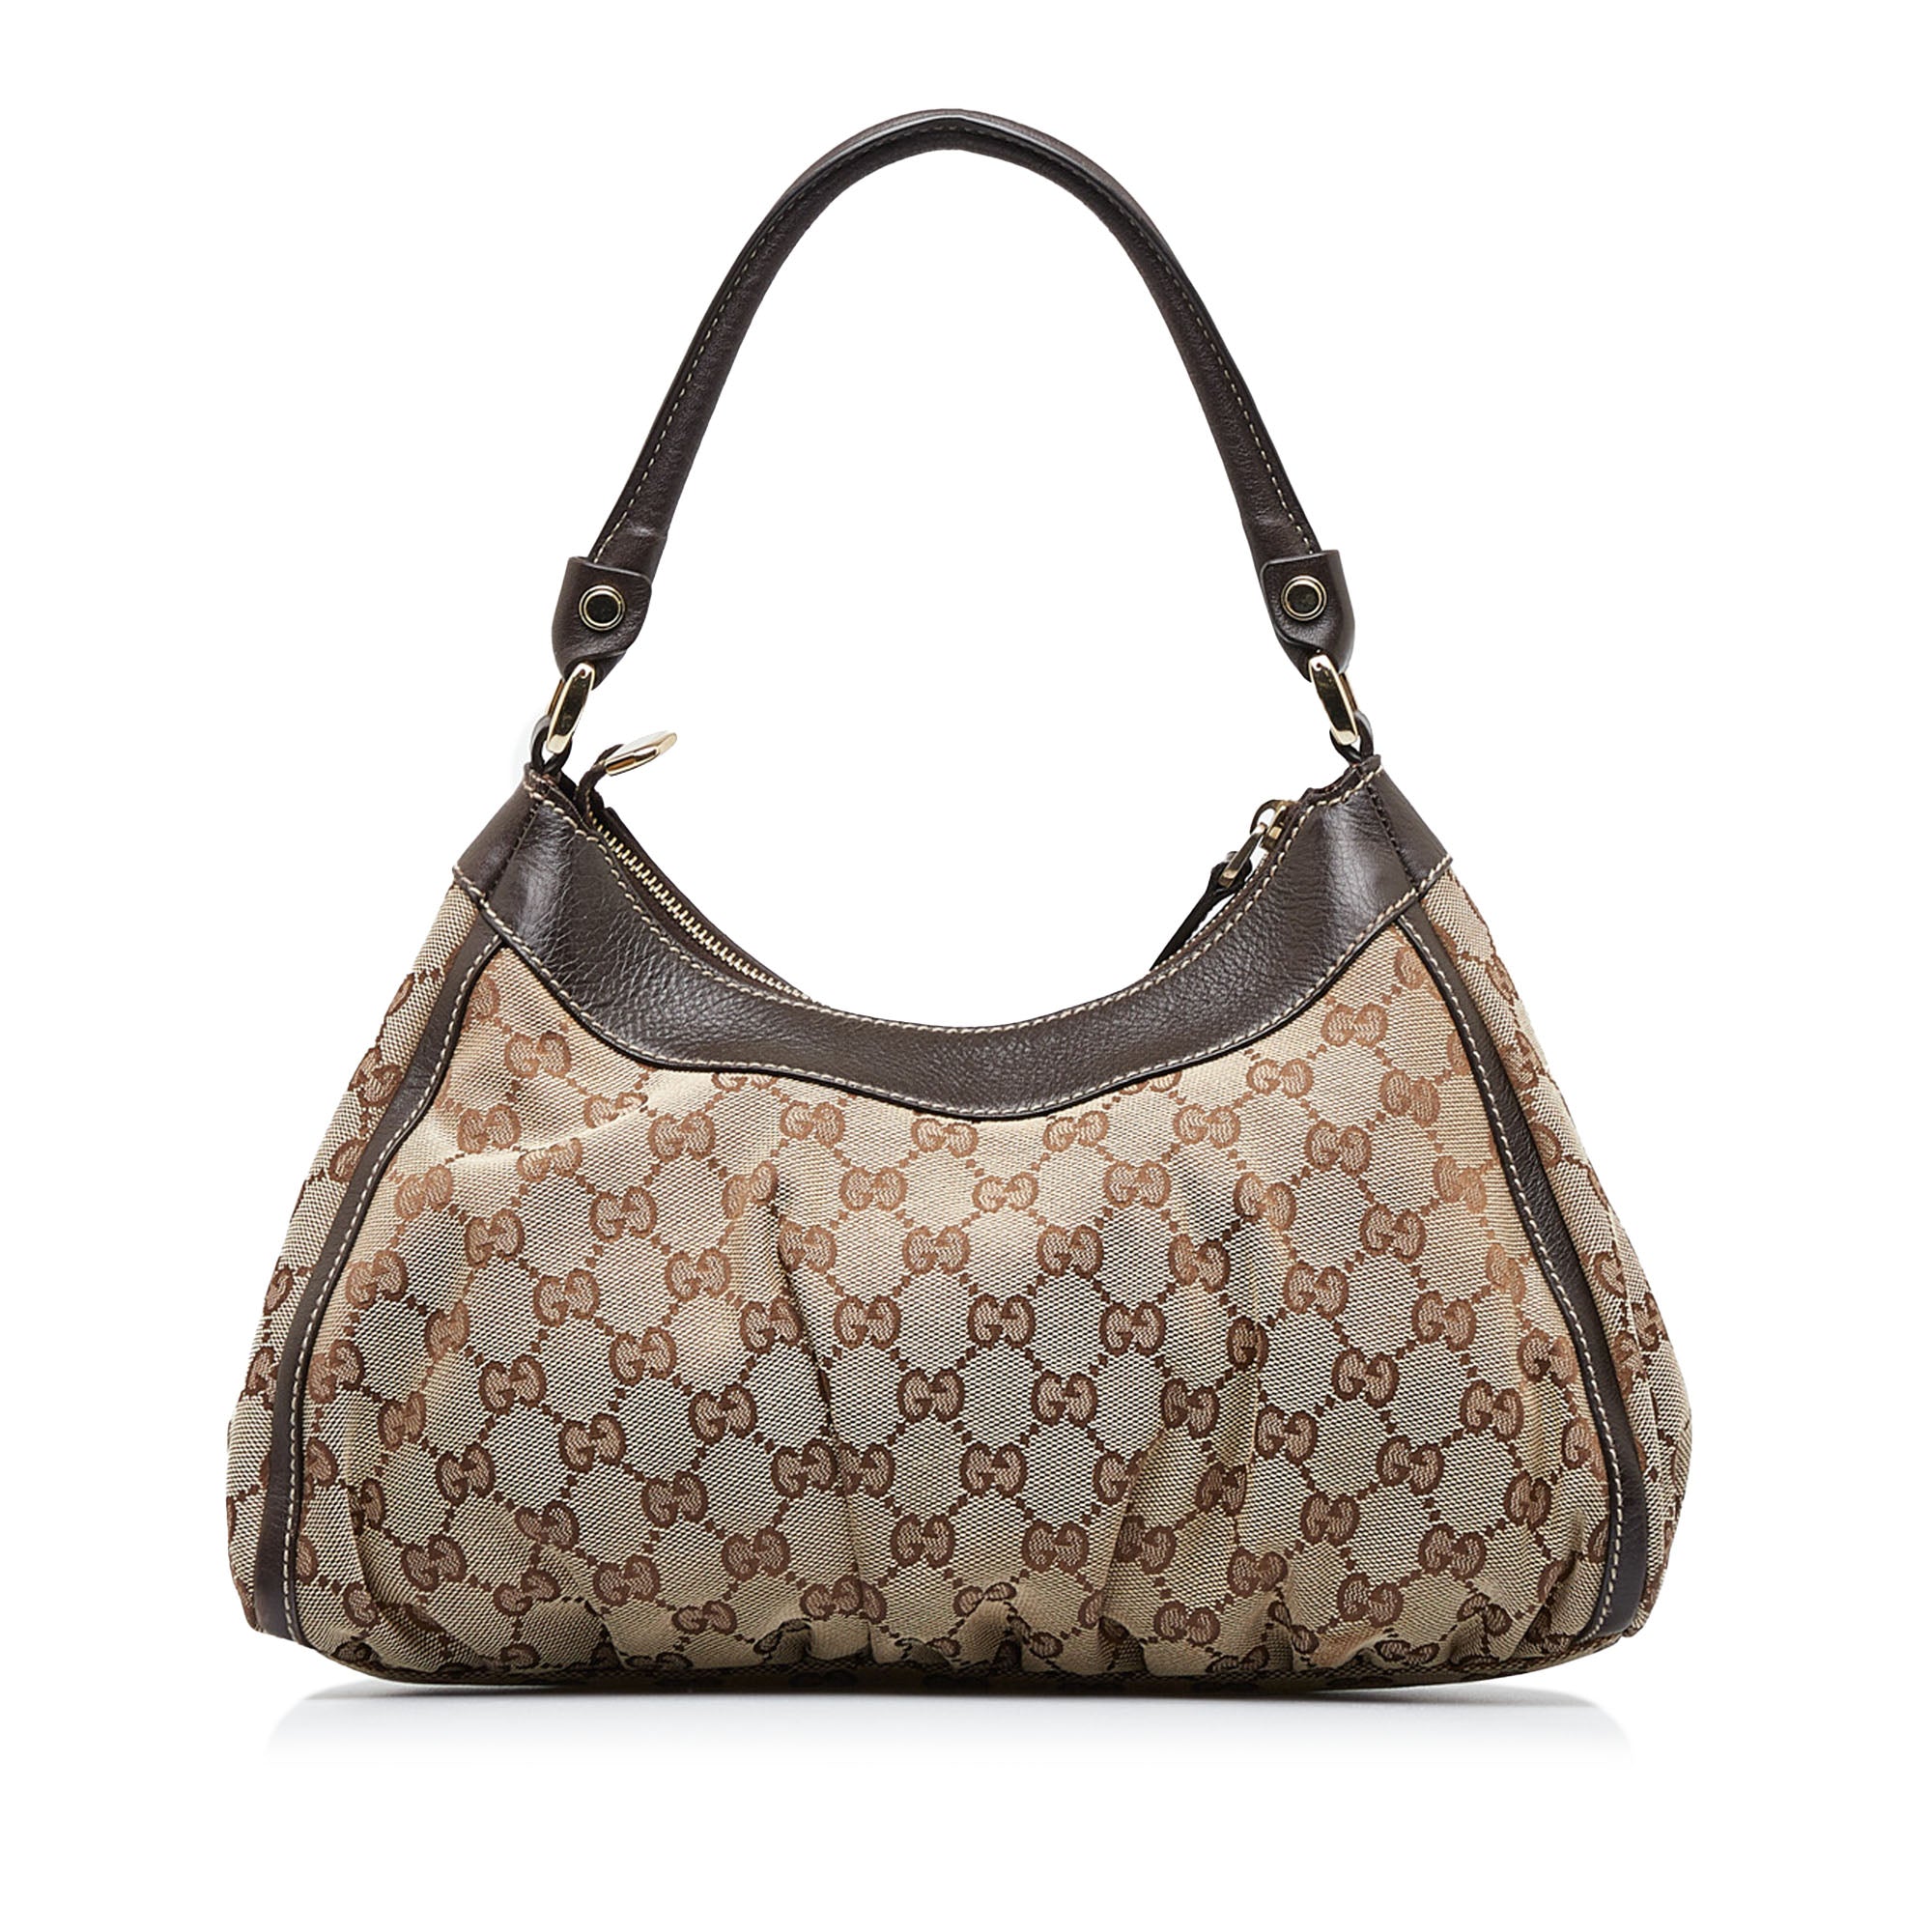  Gucci Women's Pre-Loved Abbey D-Ring Hobo Bag, Brown